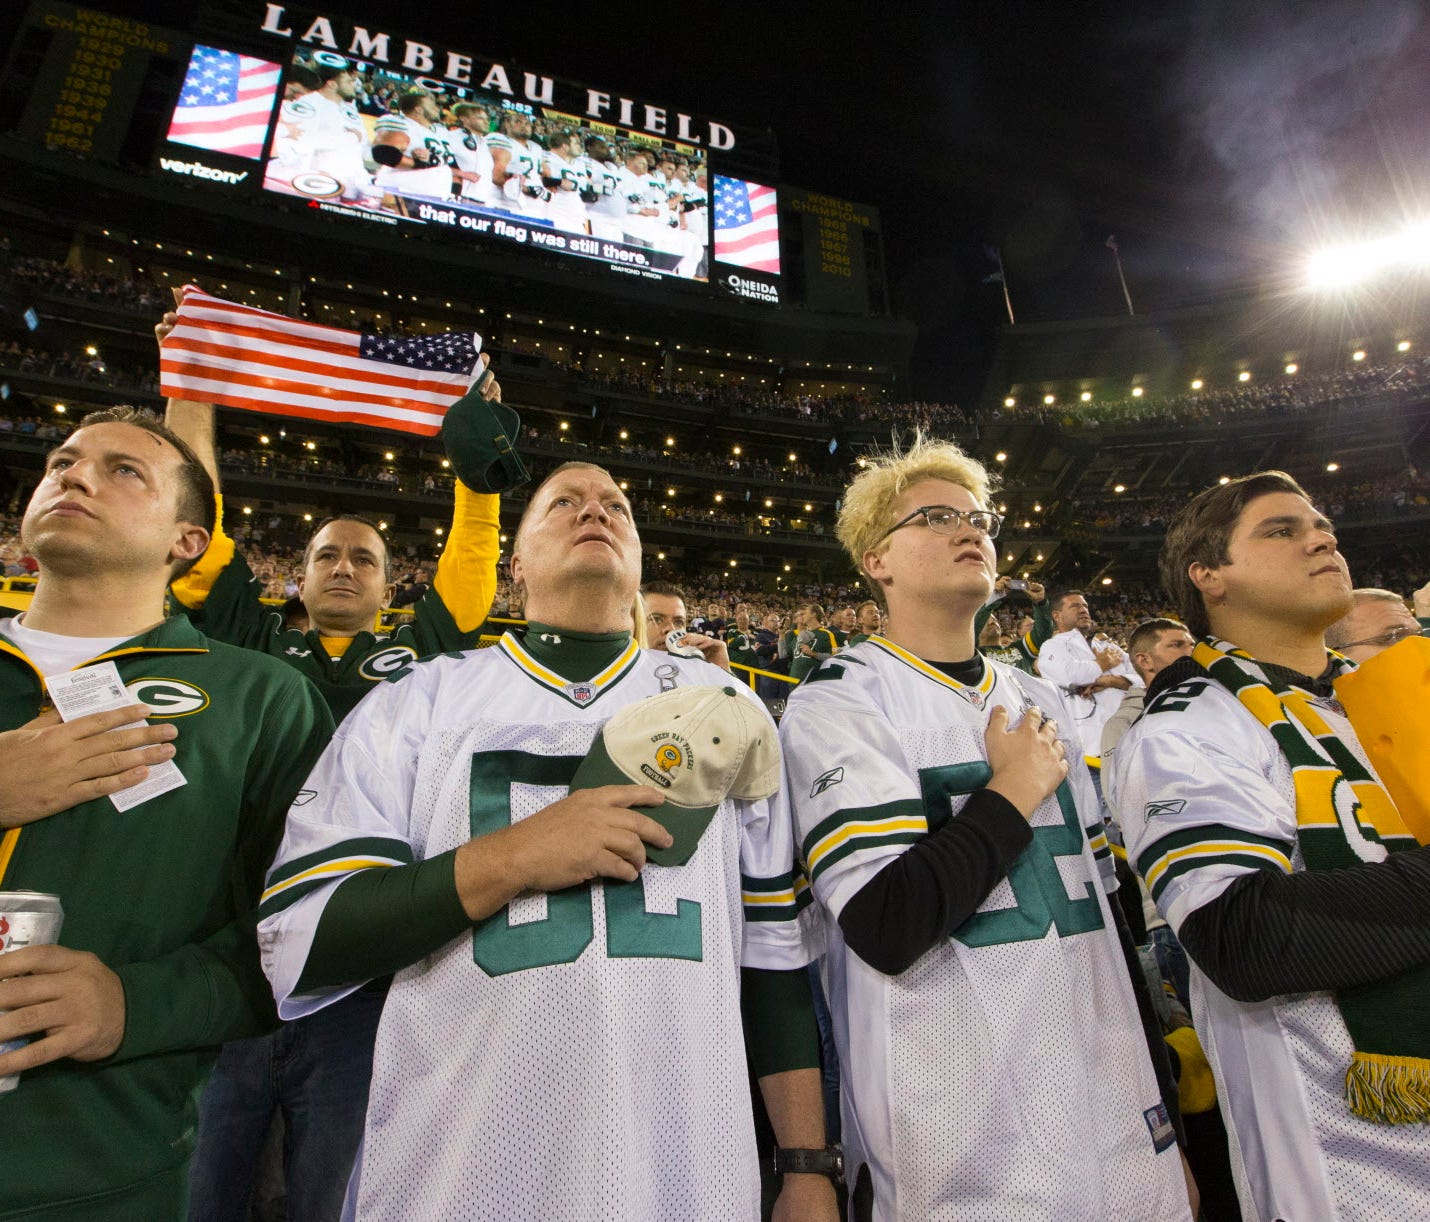 Scott Sheffield (second from left) and his sons, Connor and Spencer, stand for the national anthem before the Green Bay Packers game against the Chicago Bears  on Thursday at Lambeau Field in Green Bay. The family from St. George, Utah, said they wer